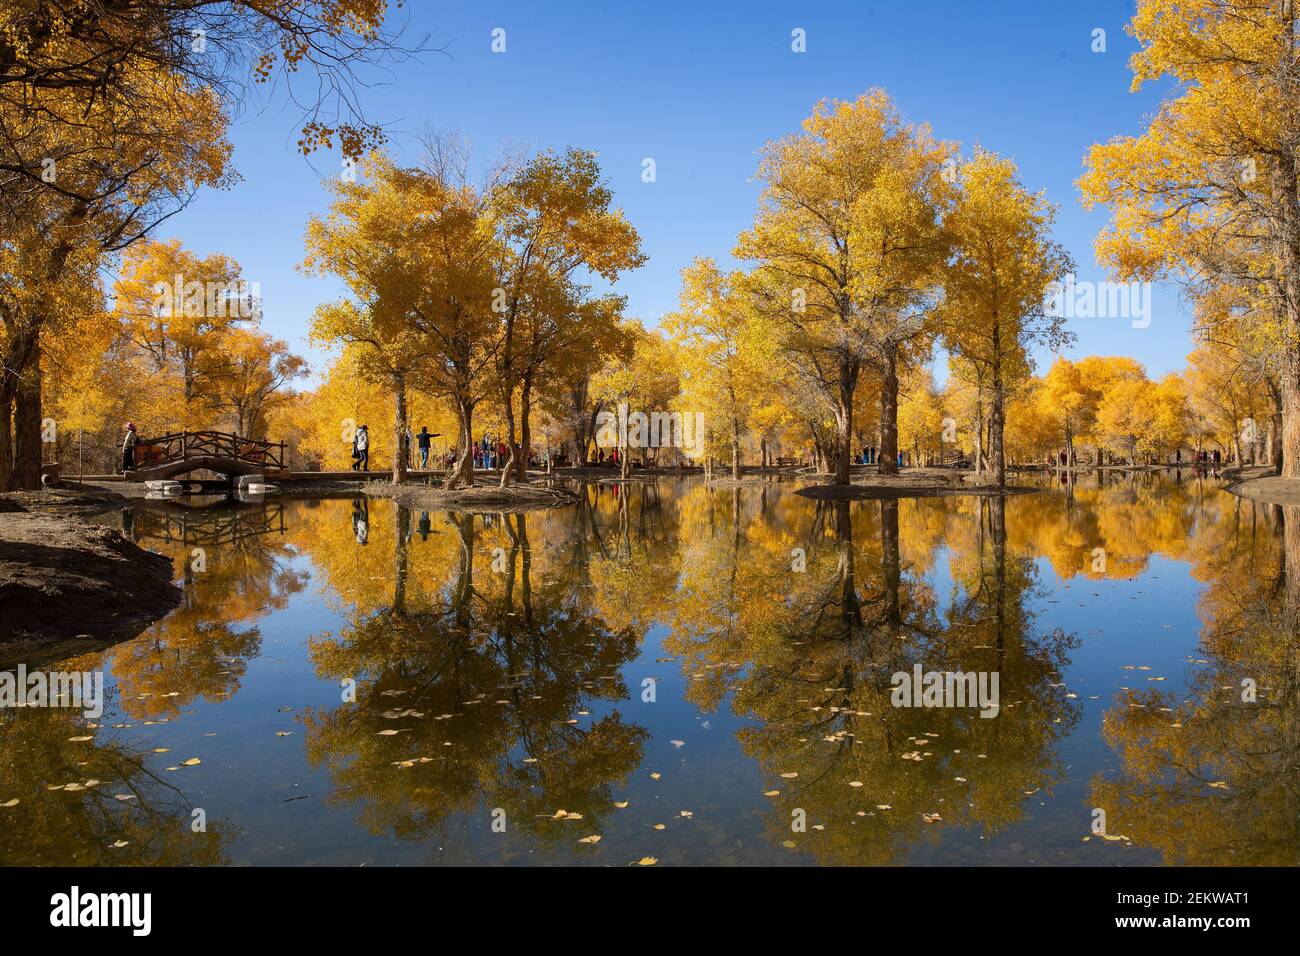 GansuÃ¯Â¼Å’CHINA-October 15, 2020, Jiuquan, Gansu province, the golden autumn, located in Jinta County, Jiuquan City, Gansu Province, the Golden Poplar forest scenic spot in the Jinta desert poplar, the best viewing period, the golden poplar forest in the sunlight under the dazzling, beautiful, attracting tourists from all over the place to come to see.(EDITORIAL USE ONLY. CHINA OUT) (Photo by /Sipa USA) Stock Photo